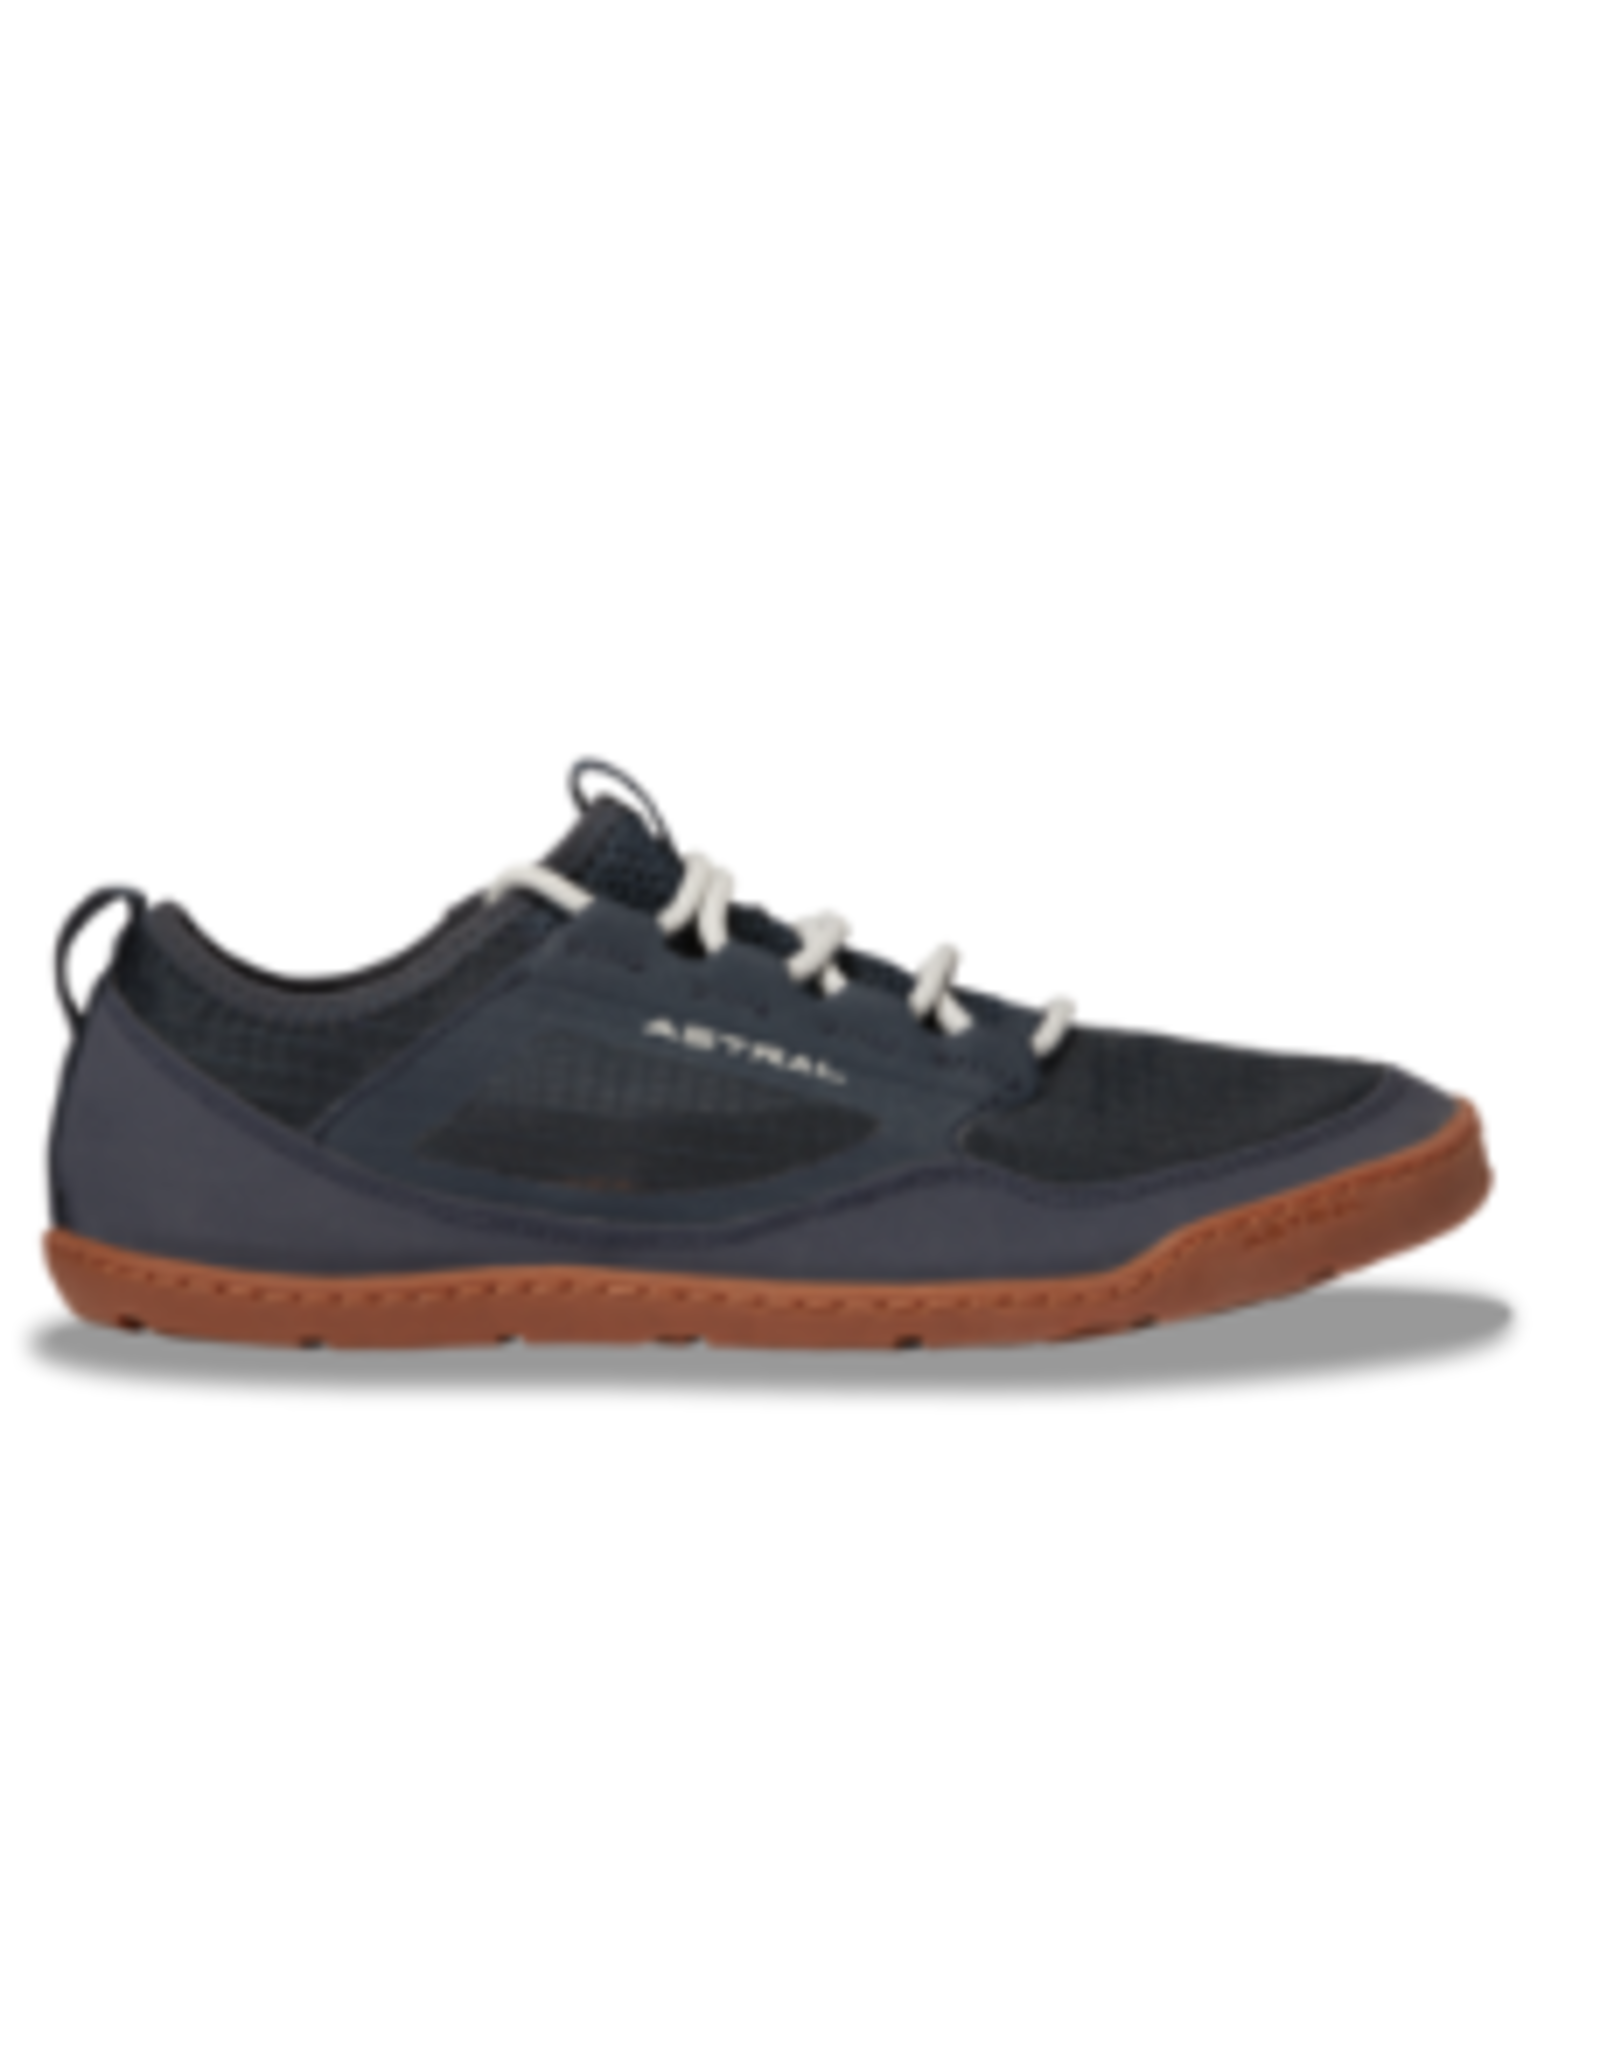 Astral Astral Loyak  Classic Men Shoes